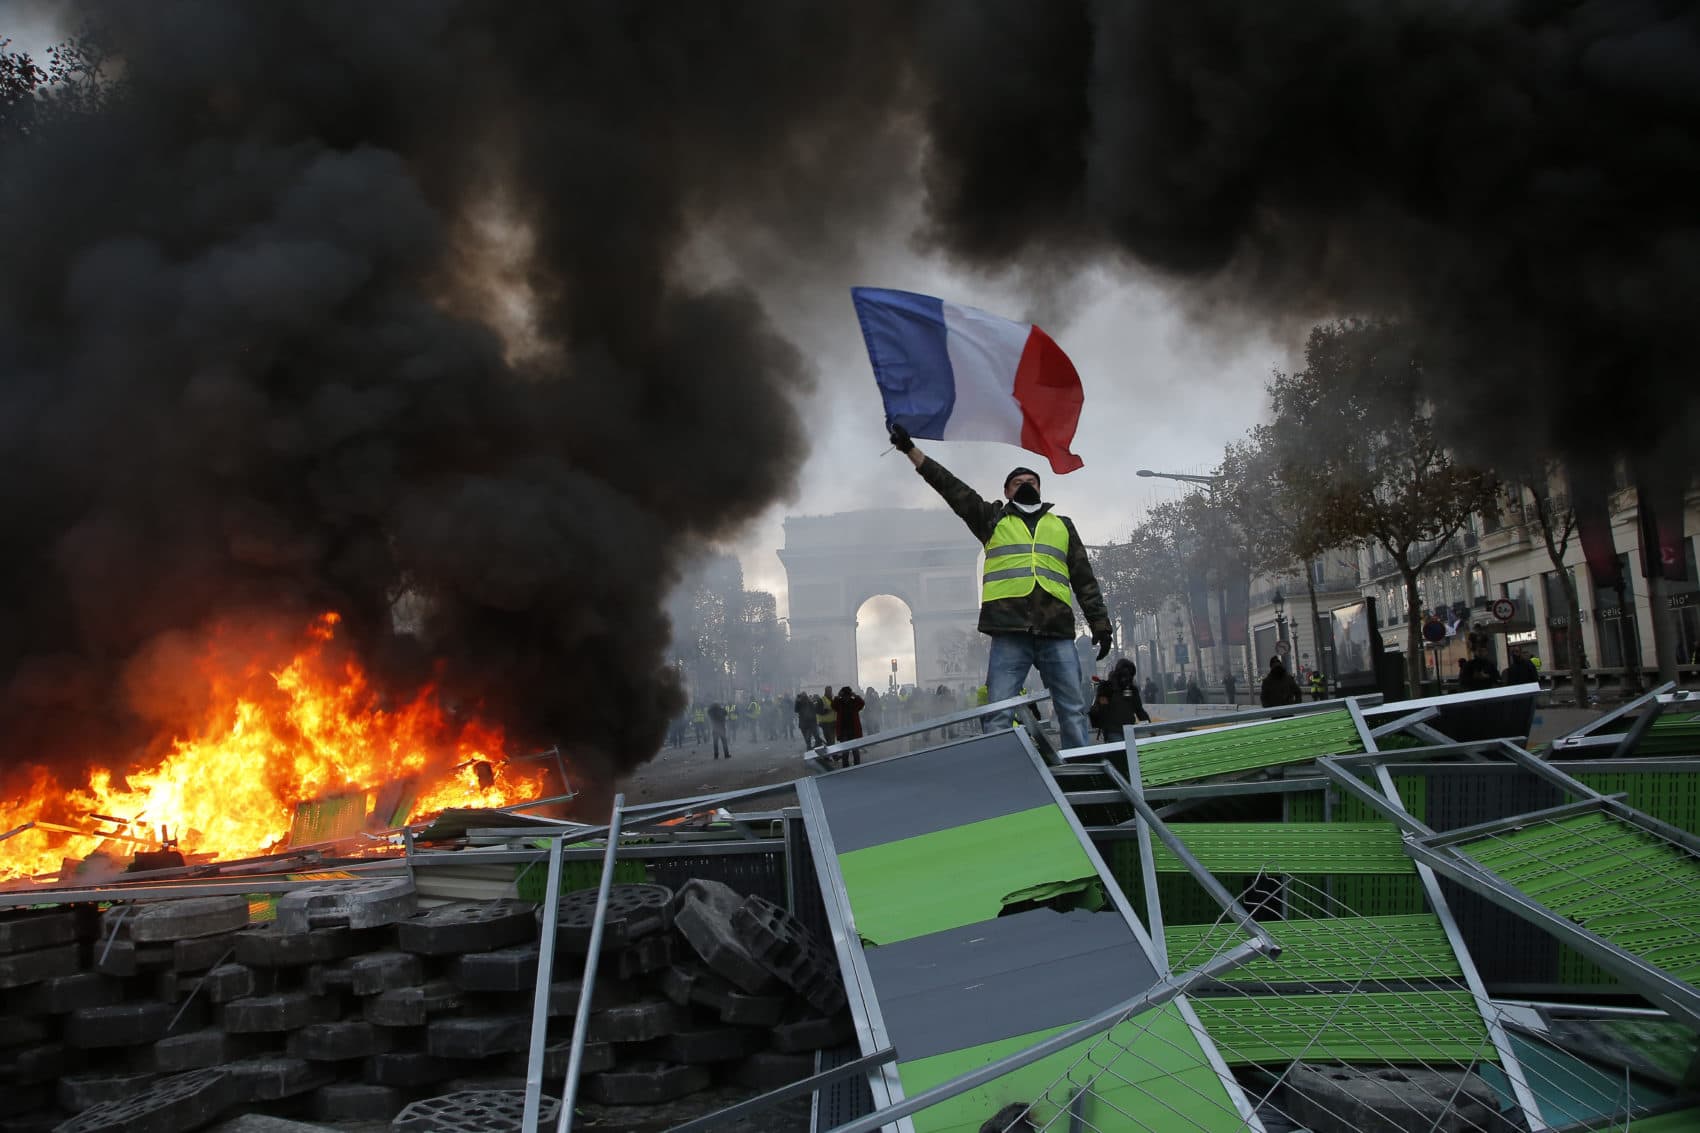 A demonstrator waves the French flag onto a burning barricade on the Champs-Elysees avenue during a demonstration against the rising of the fuel taxes, Saturday, Nov. 24, 2018 in Paris. (Michel Euler/AP)